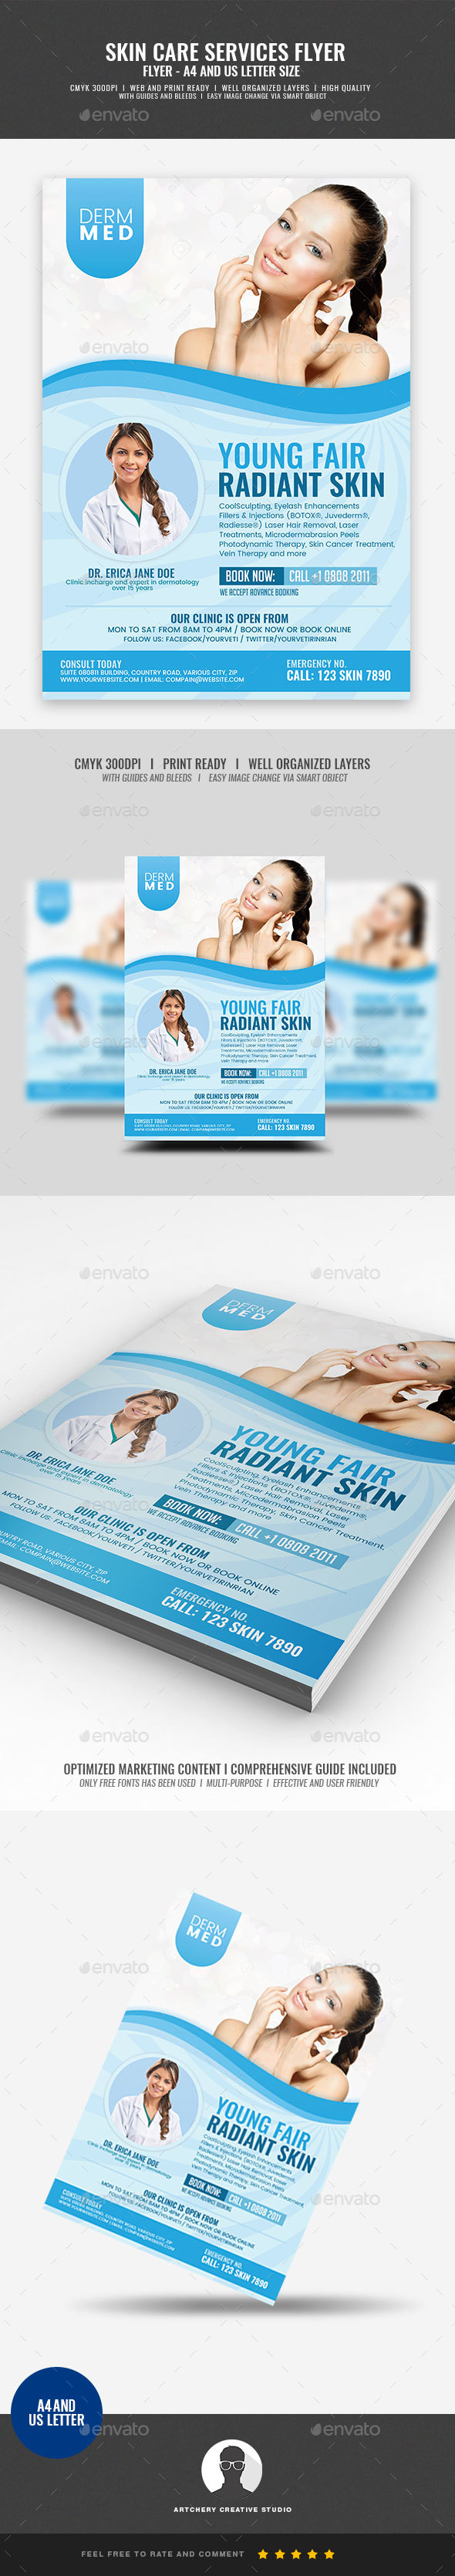 Skin Care Services Flyer